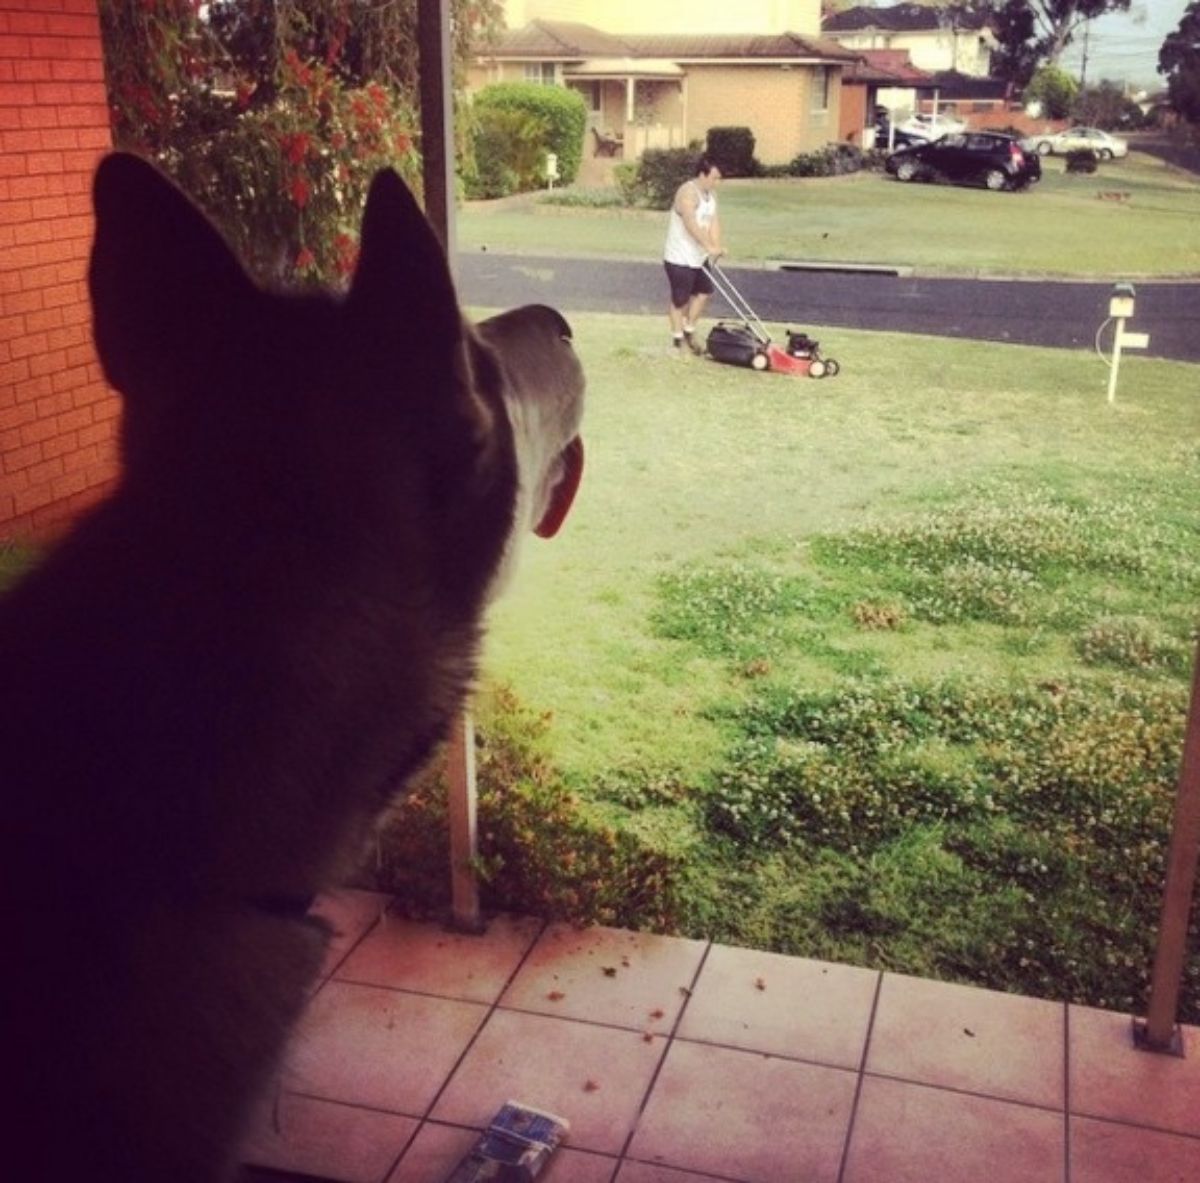 black and white dog licking a glass with someone mowing the lawn outside